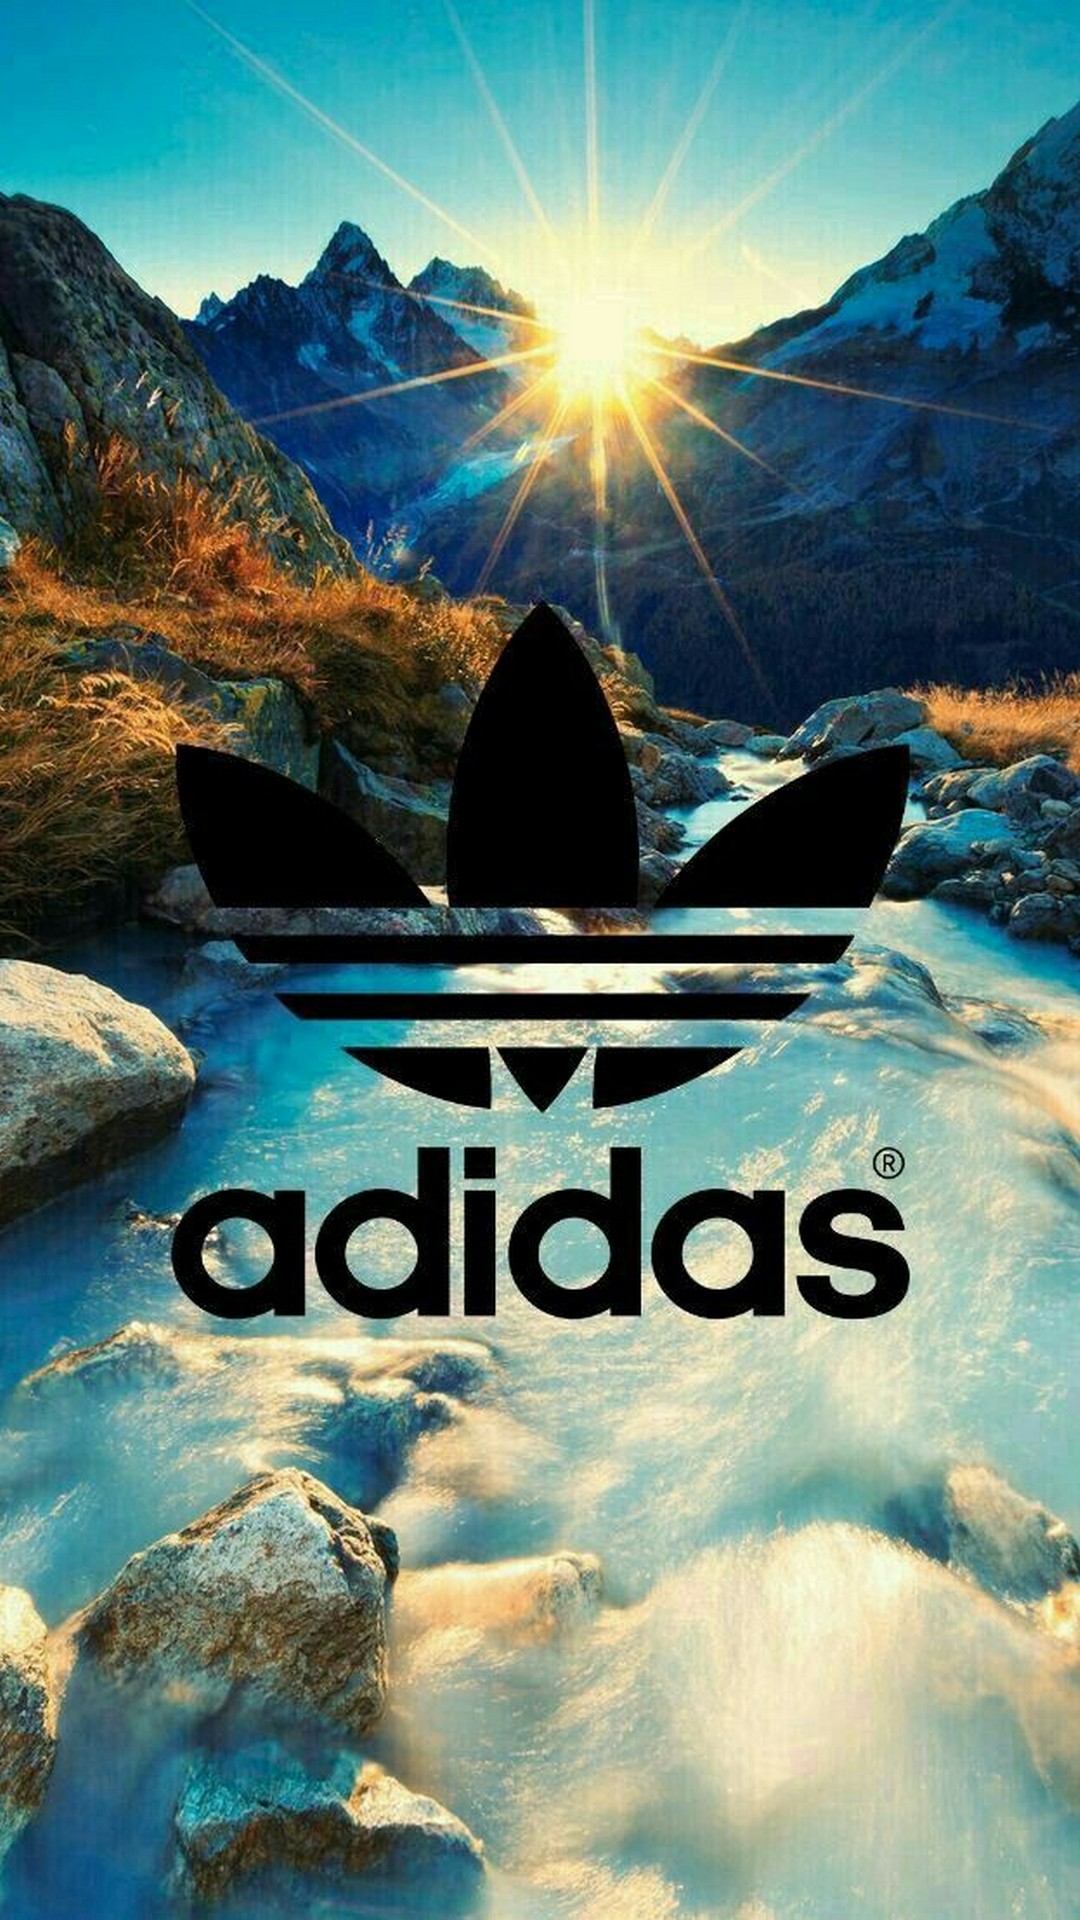 Adidas Phone 8 Wallpaper with high-resolution 1080x1920 pixel. Download all Mobile Wallpapers and Use them as wallpapers for your iPhone, Tablet, iPad, Android and other mobile devices